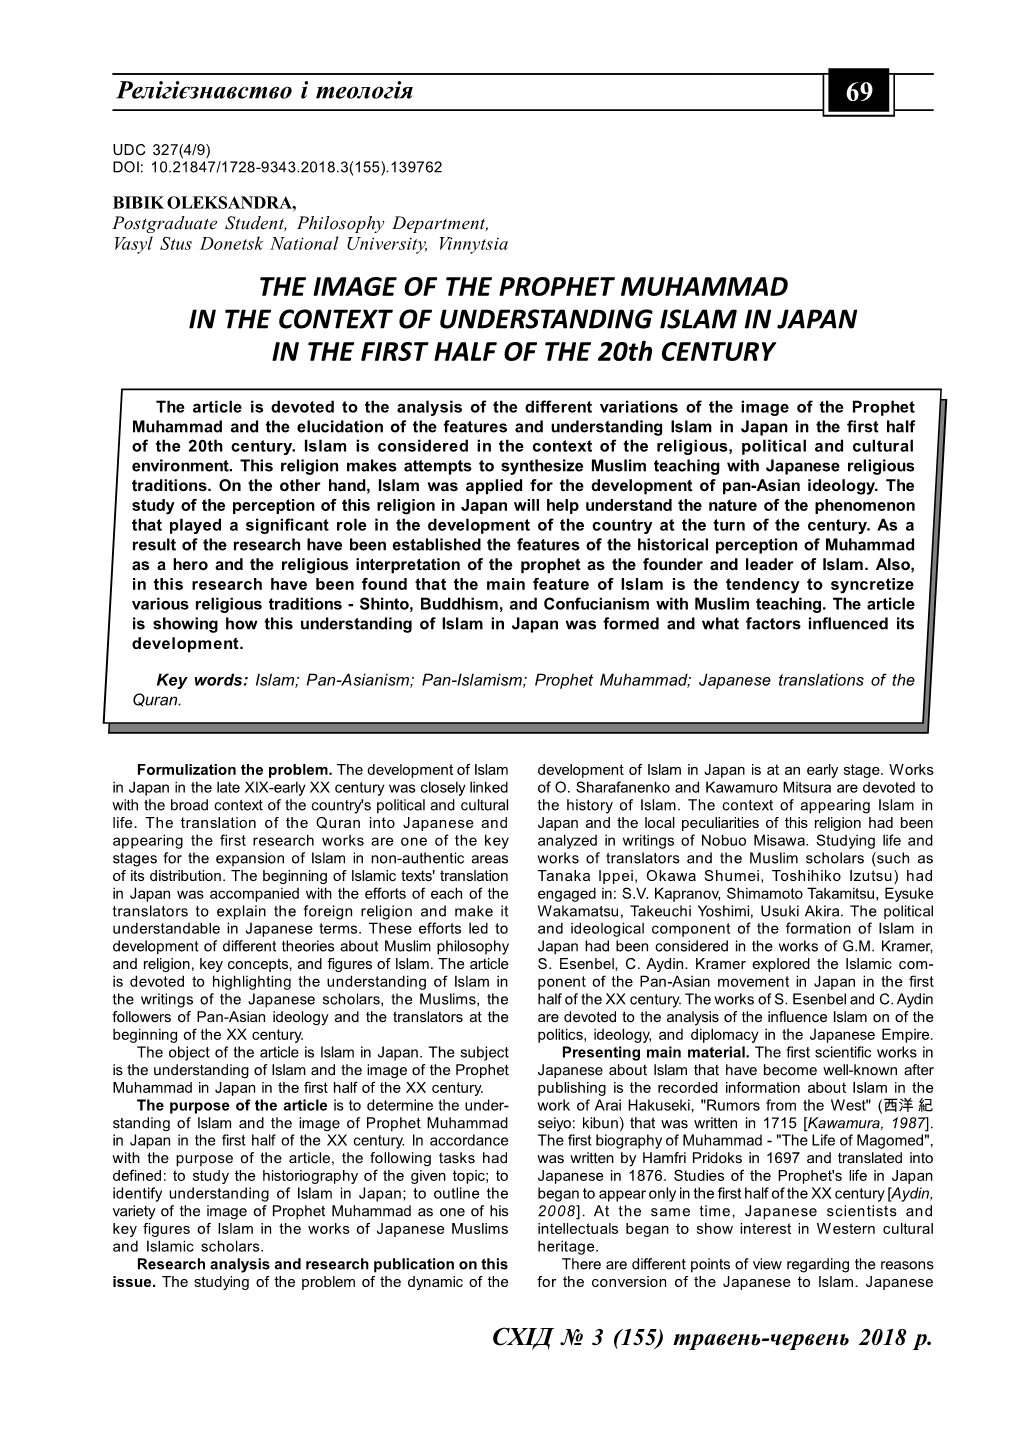 THE IMAGE of the PROPHET MUHAMMAD in the CONTEXT of UNDERSTANDING ISLAM in JAPAN in the FIRST HALF of the 20Th CENTURY